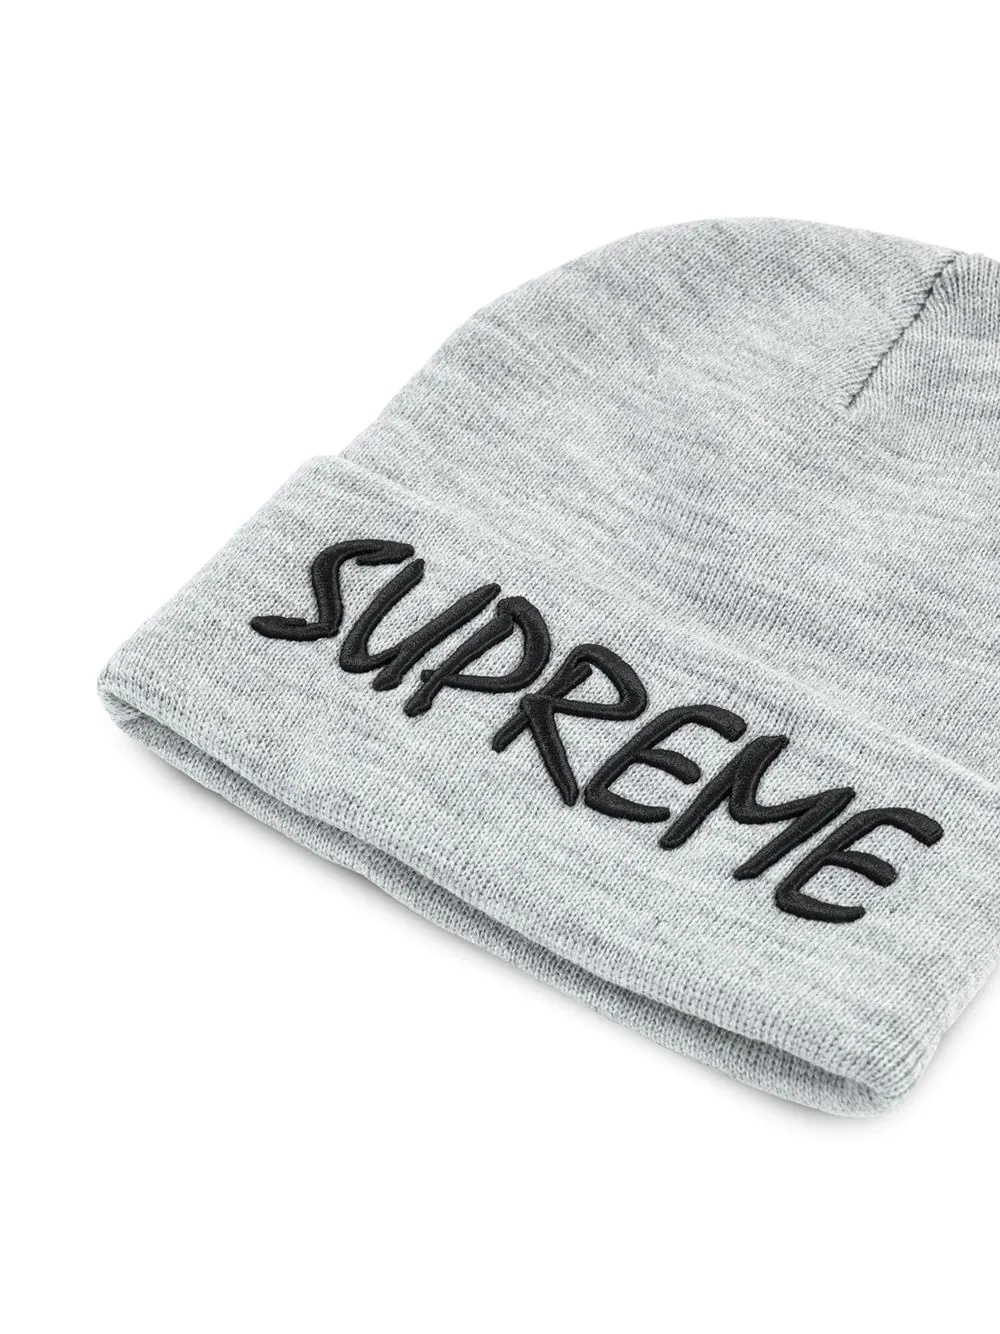 FTP knitted beanie hat - 2